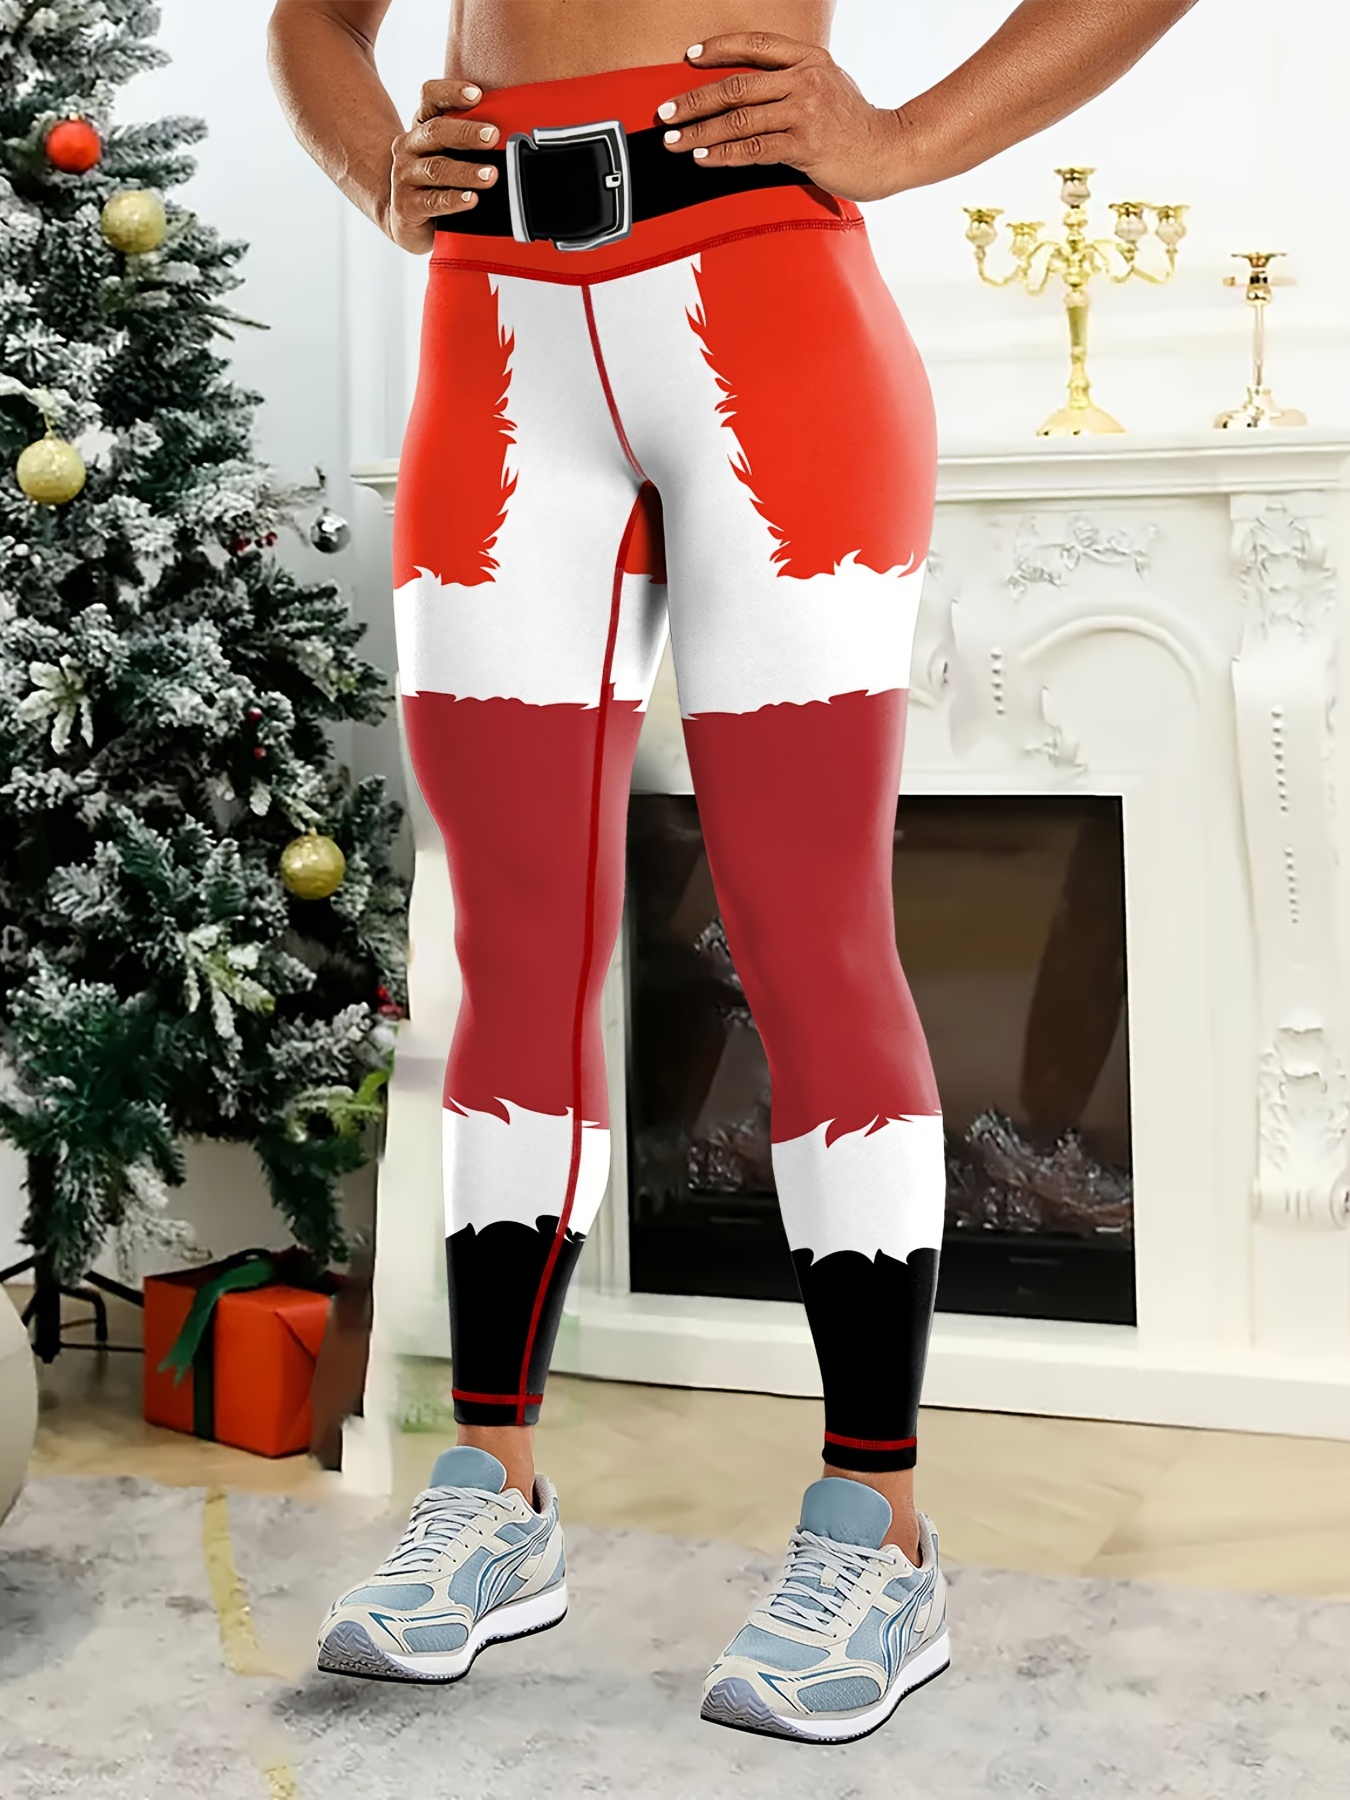 Candy Cane Leggings Women, Red White Striped Printed Yoga Pants Holida